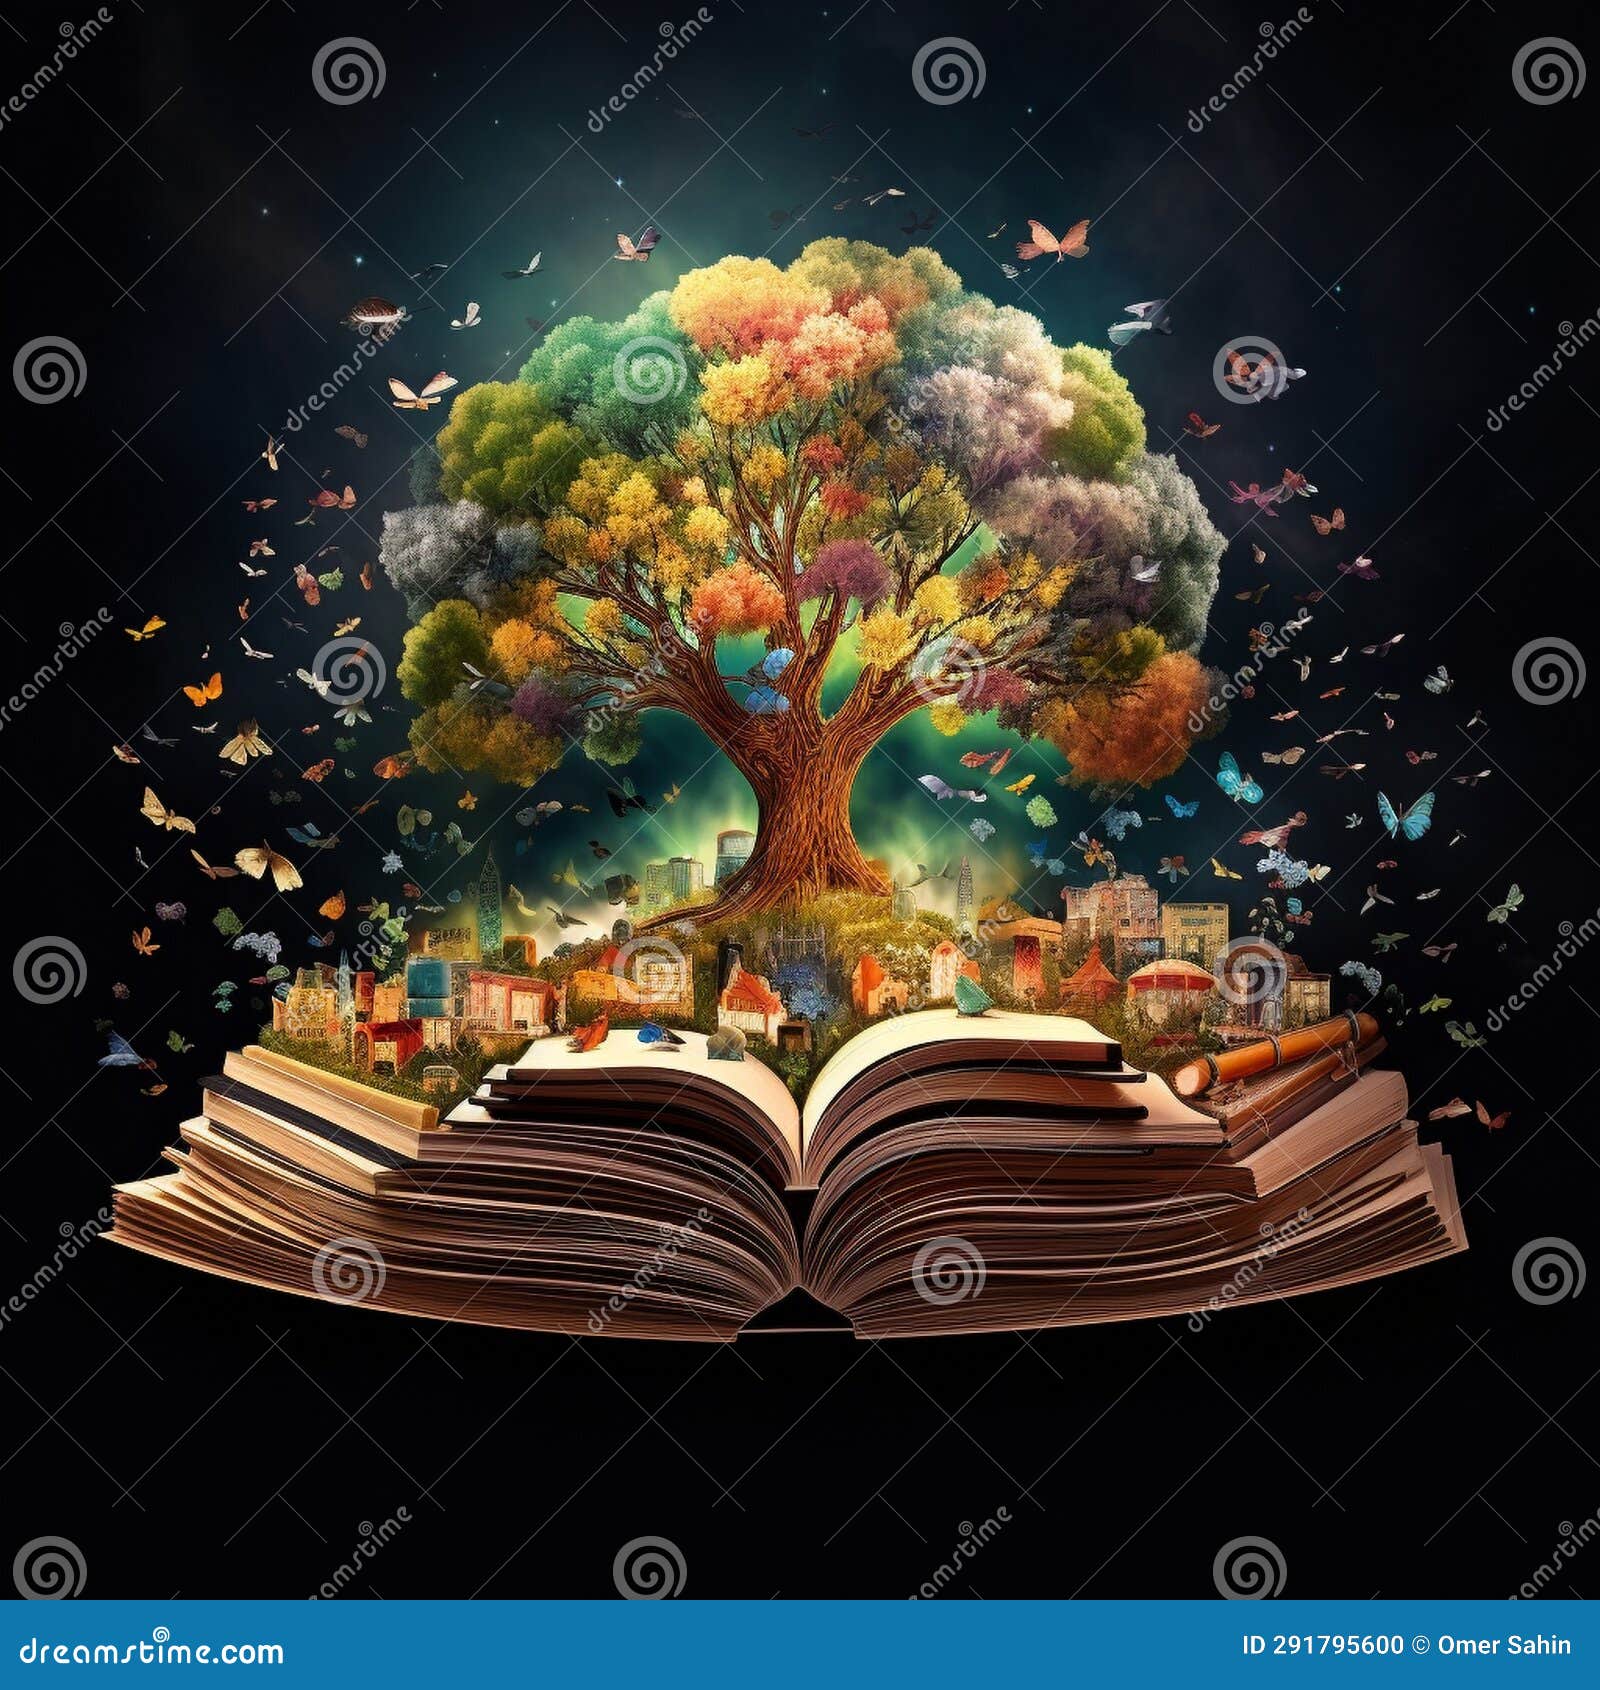 literary origins: an inkwell sprouting a tree of books